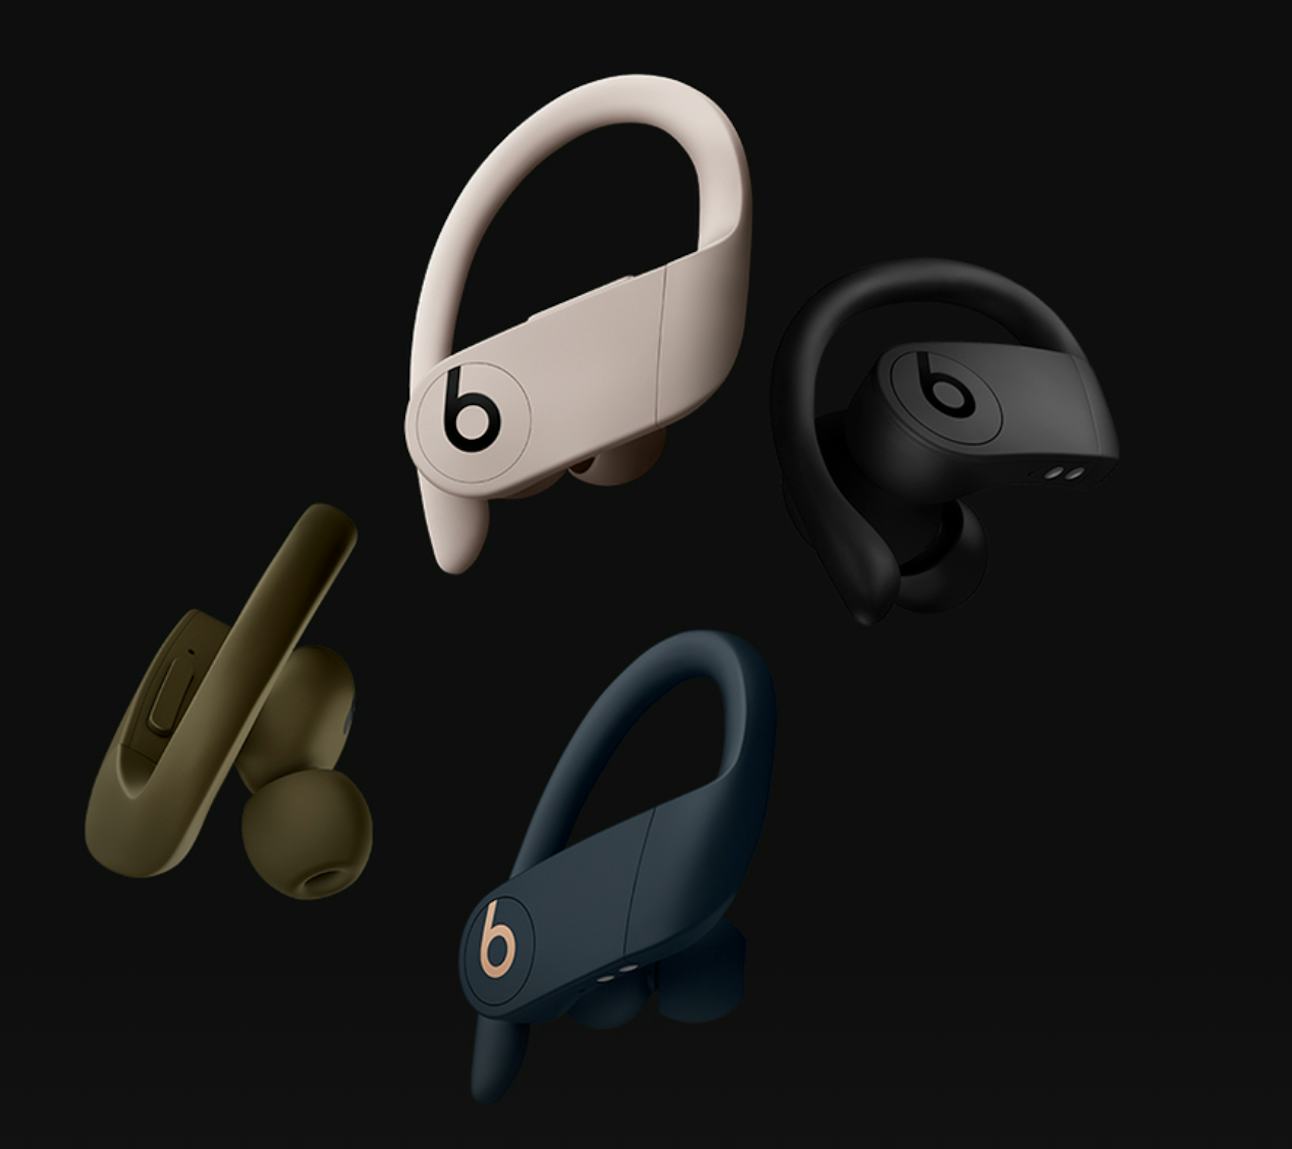 Everything you need to know about Beats’ new totally wireless earbuds